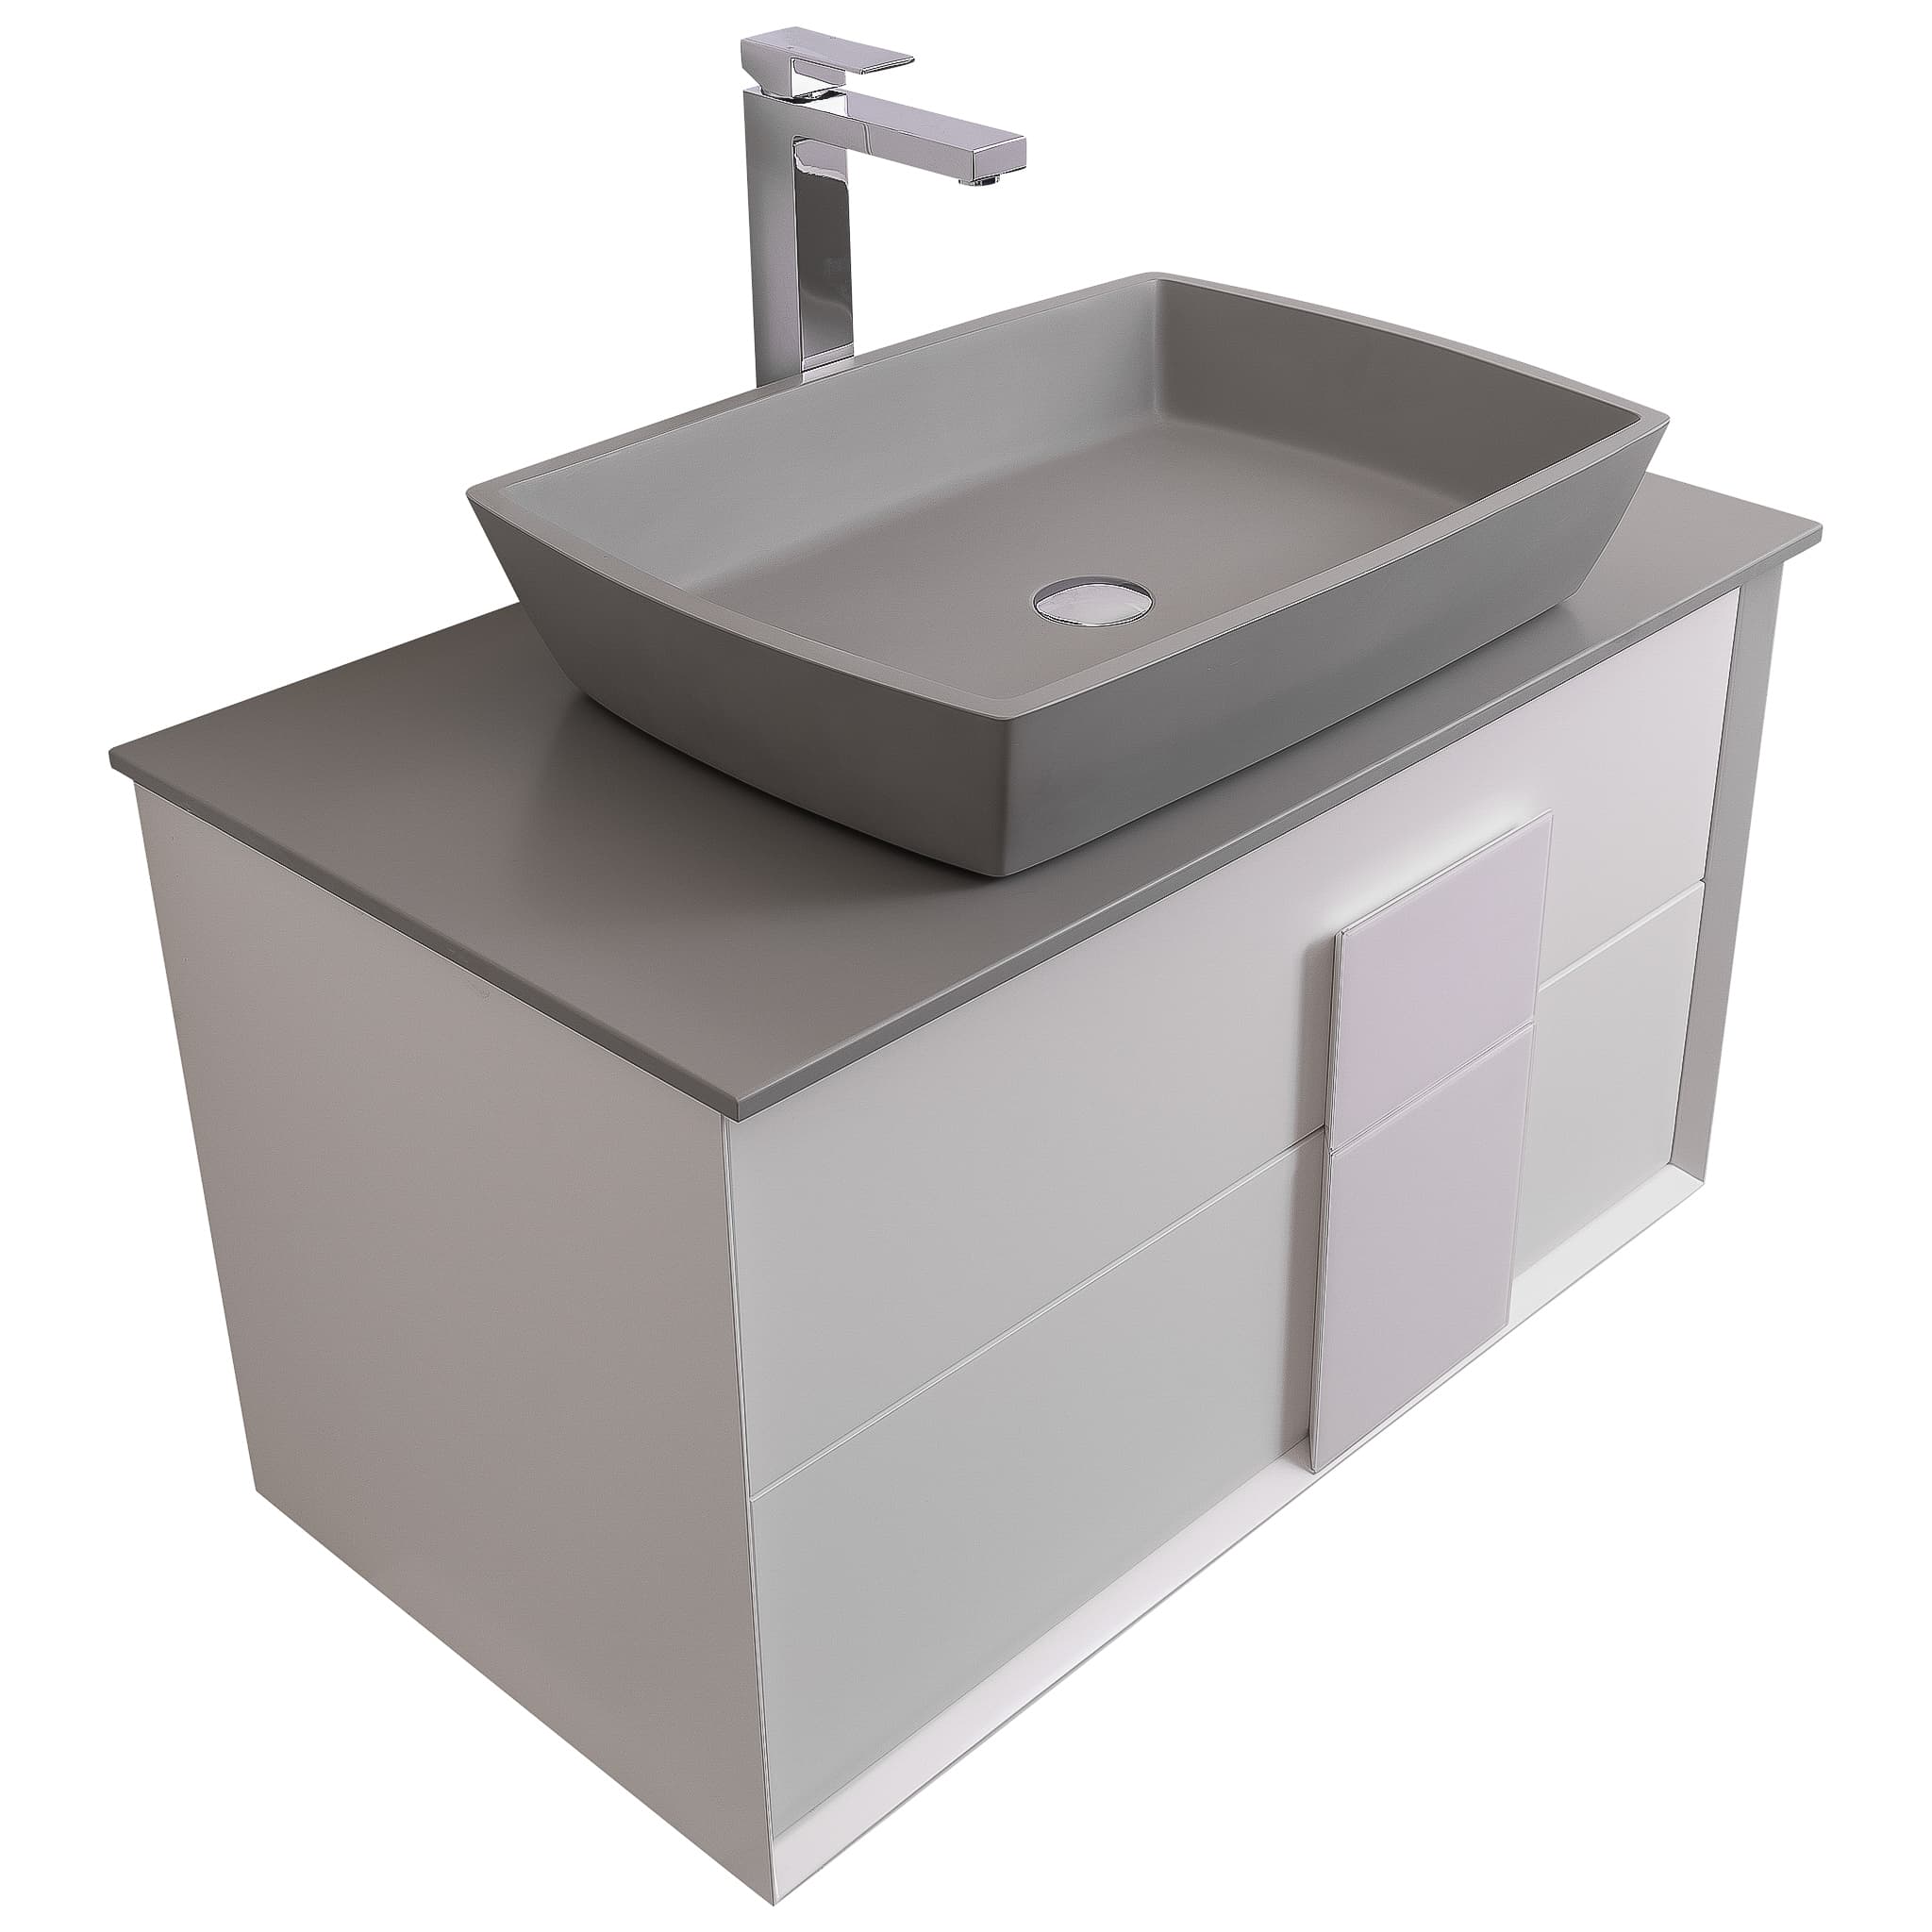 Piazza 31.5 Matte White With White Handle Cabinet, Solid Surface Flat Grey Counter and Square Solid Surface Grey Basin 1316, Wall Mounted Modern Vanity Set